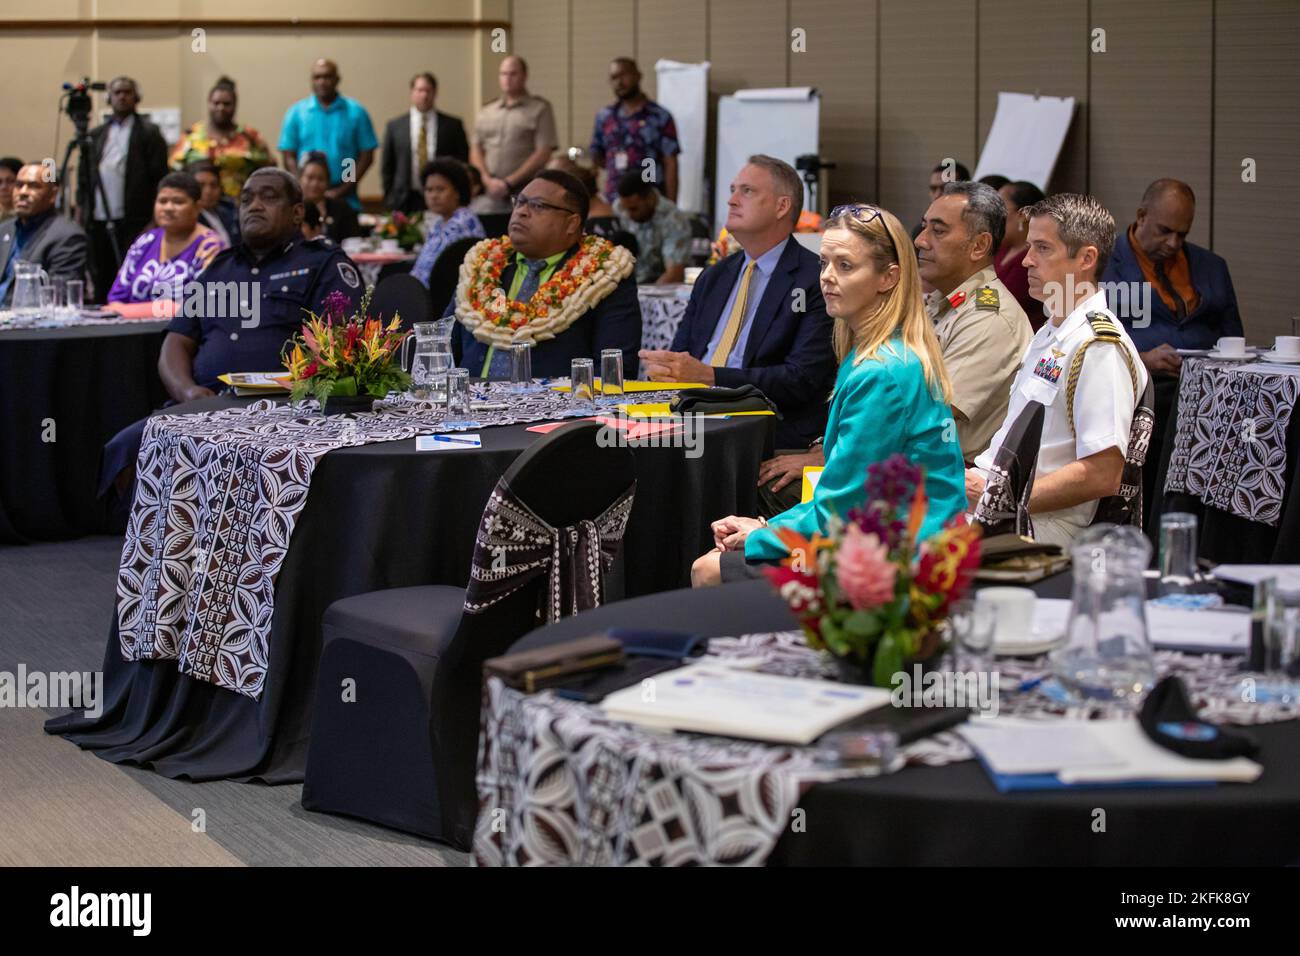 Distinguished guests of honor representing the U.S. Department of State, Fiji Ministry of Defence, Republic of Fiji Military Forces, and Fiji Police Force, receive a brief providing action recommendations at Fiji’s first Women, Peace and Security National Action Plan Orientation Workshop. Facilitated by U.S. Indo-Pacific Command, the workshop consisted of Fijian government and civil society organization representatives who lead the development of a Fiji WPS National Action Plan guided by UN Security Council Resolution (UNSCR) 1325 principles and gender perspective. Stock Photo